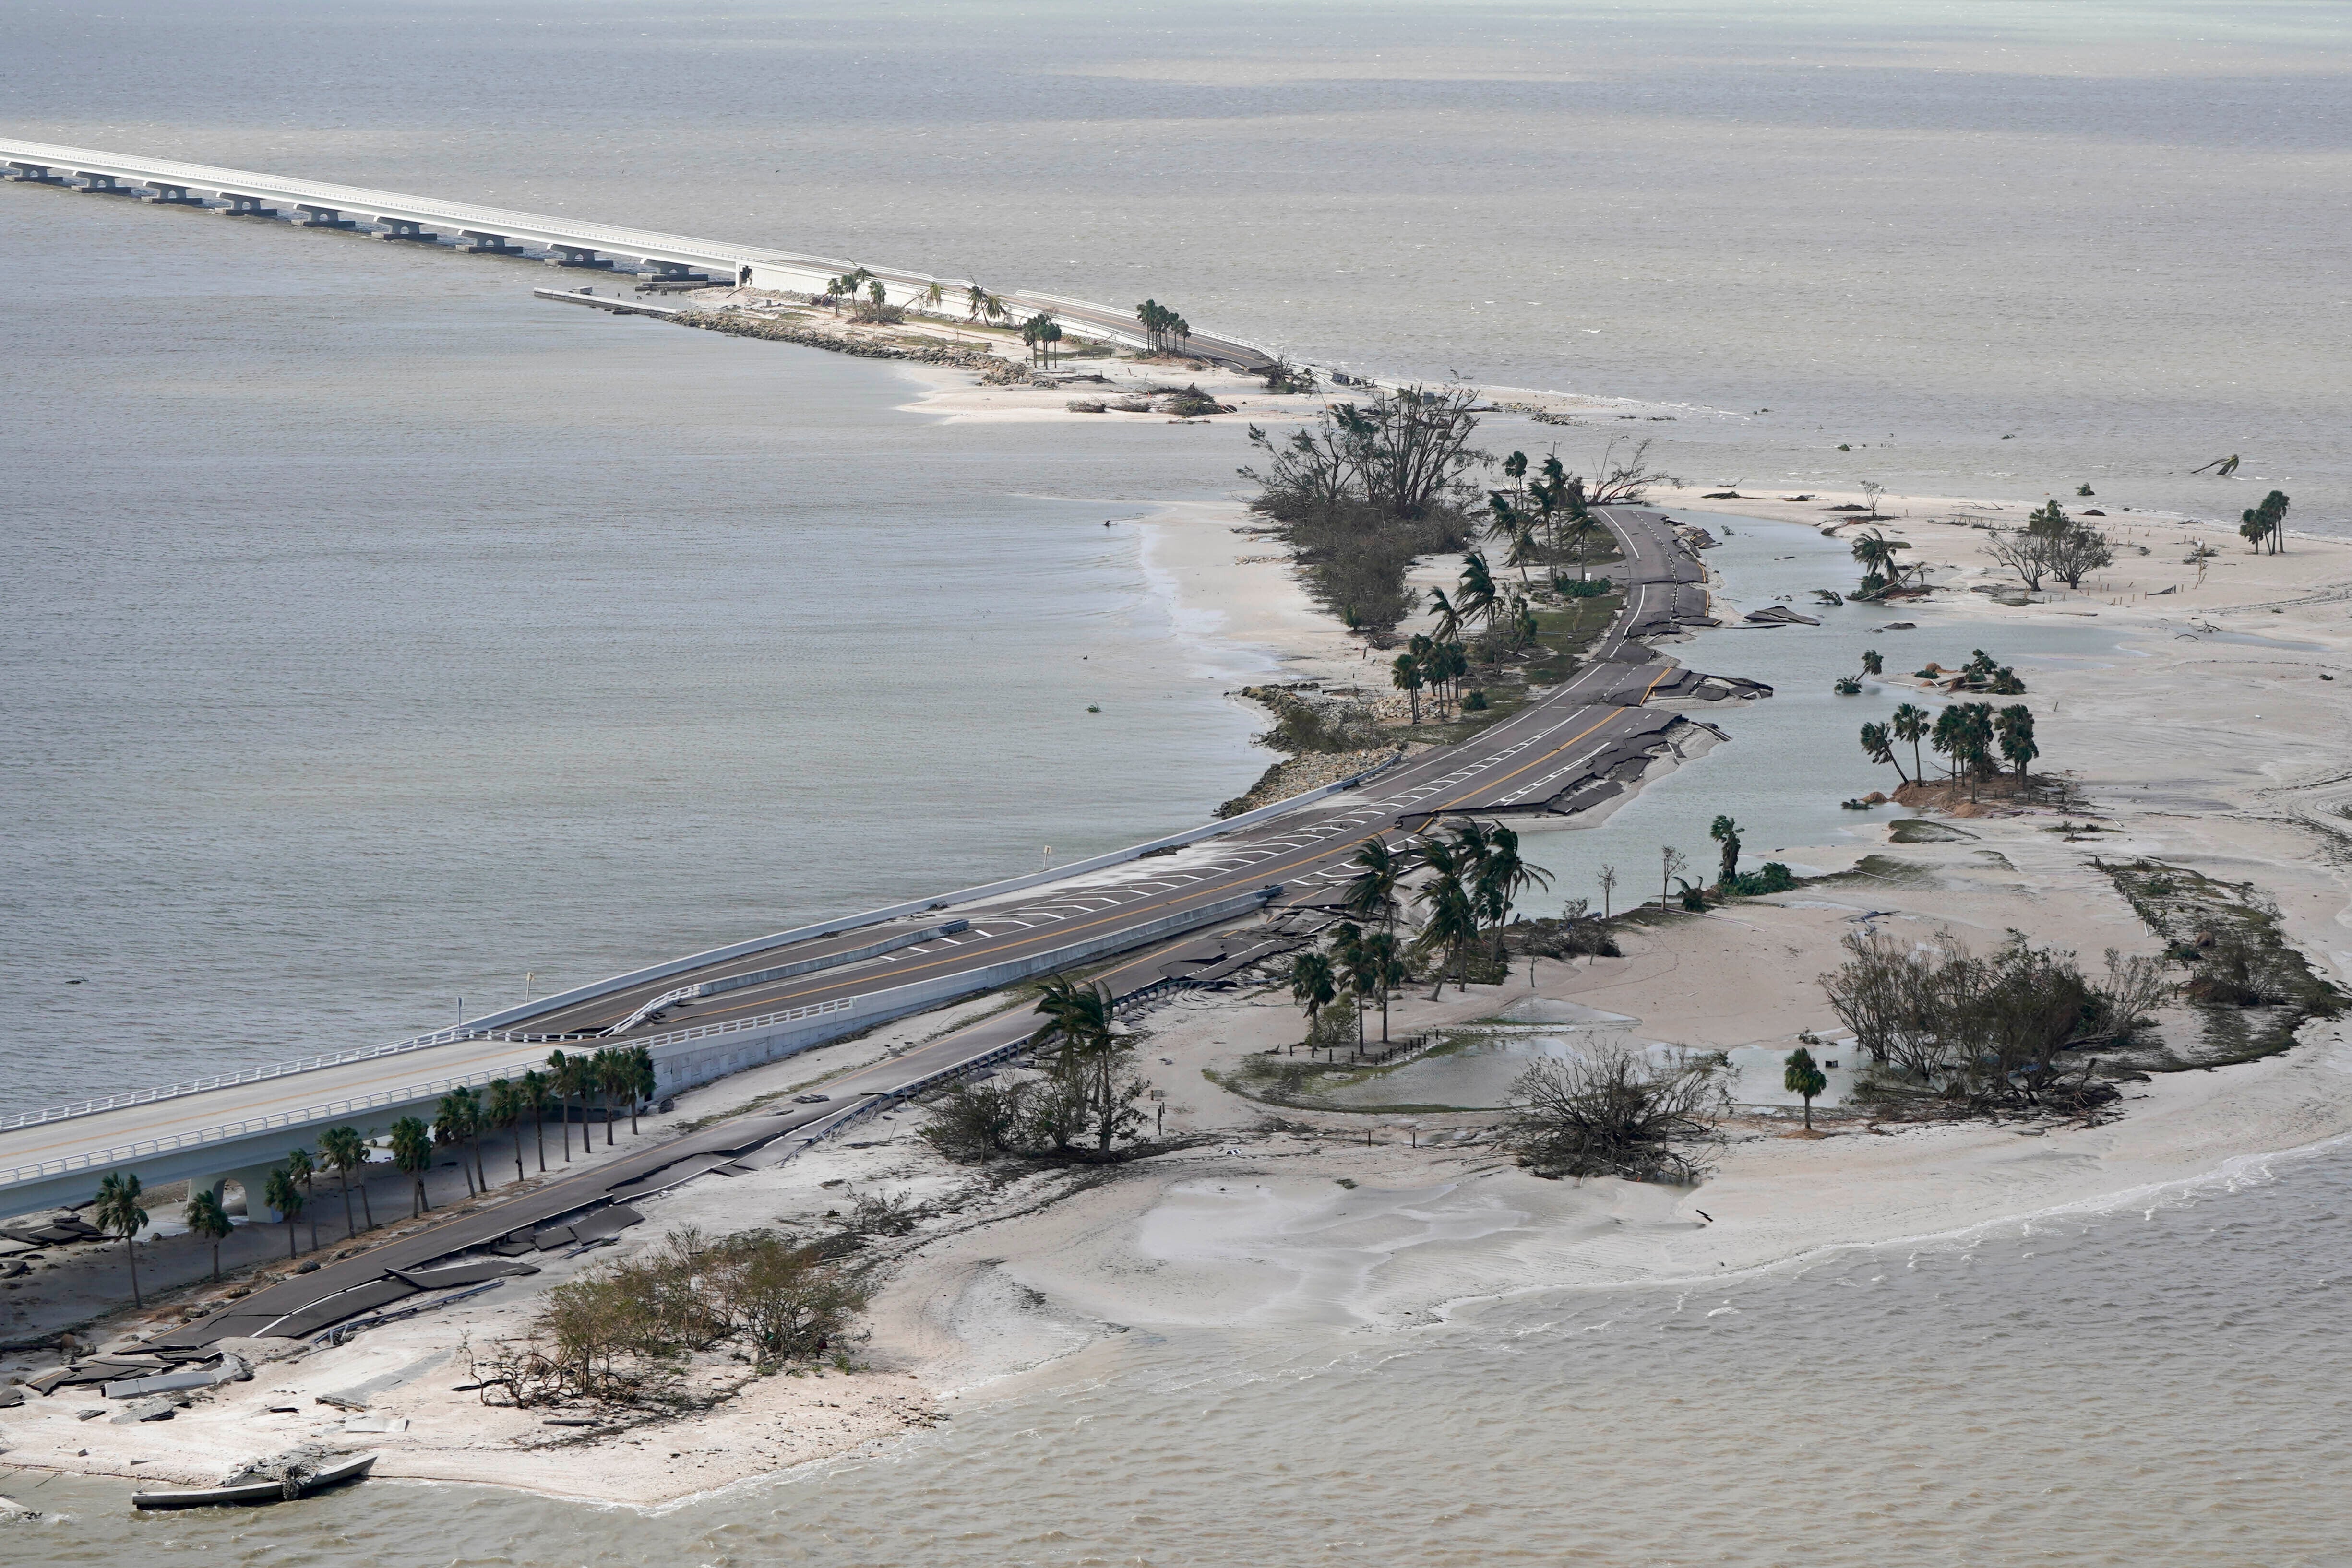 A section of the causeway to Sanibel Island collapsed after Hurricane Ian made landfall